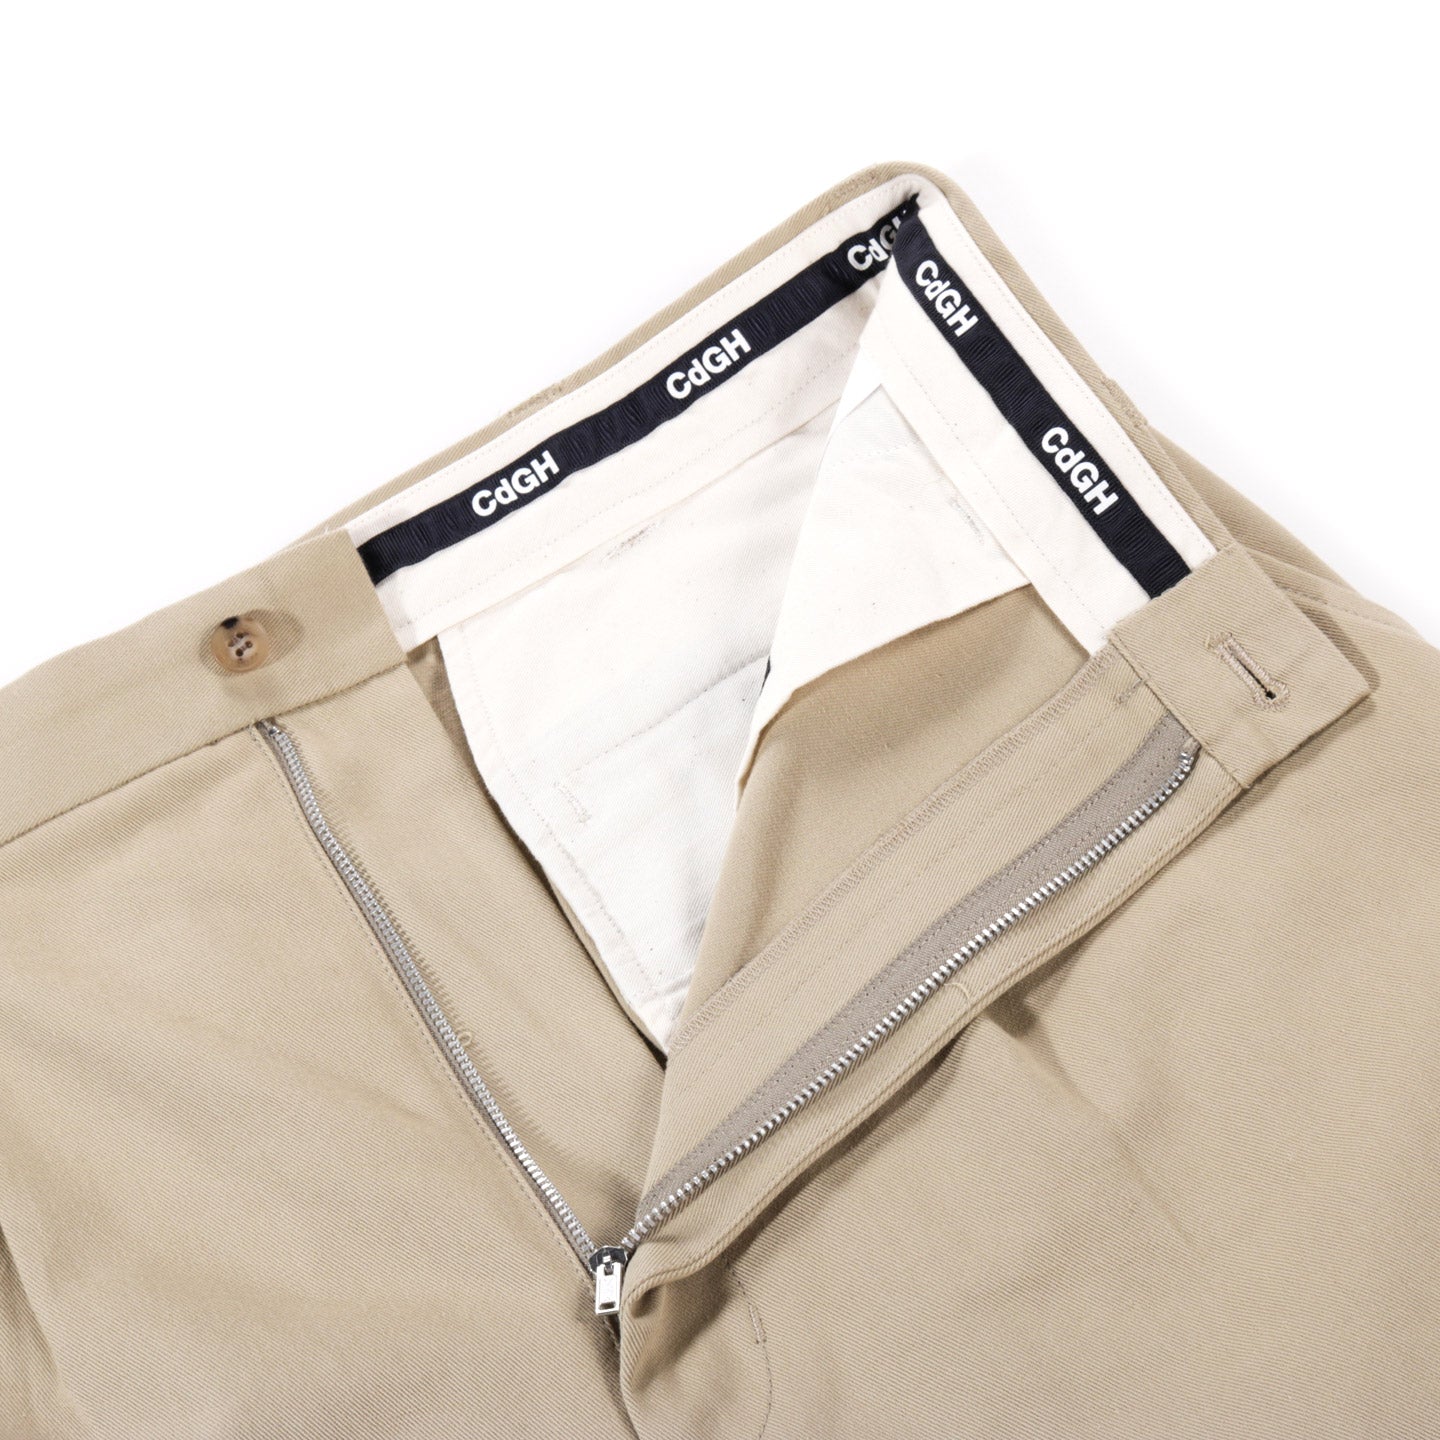 COMME DES GARCONS HOMME P003 WIDE PLEATED CHINO PANT BEIGE